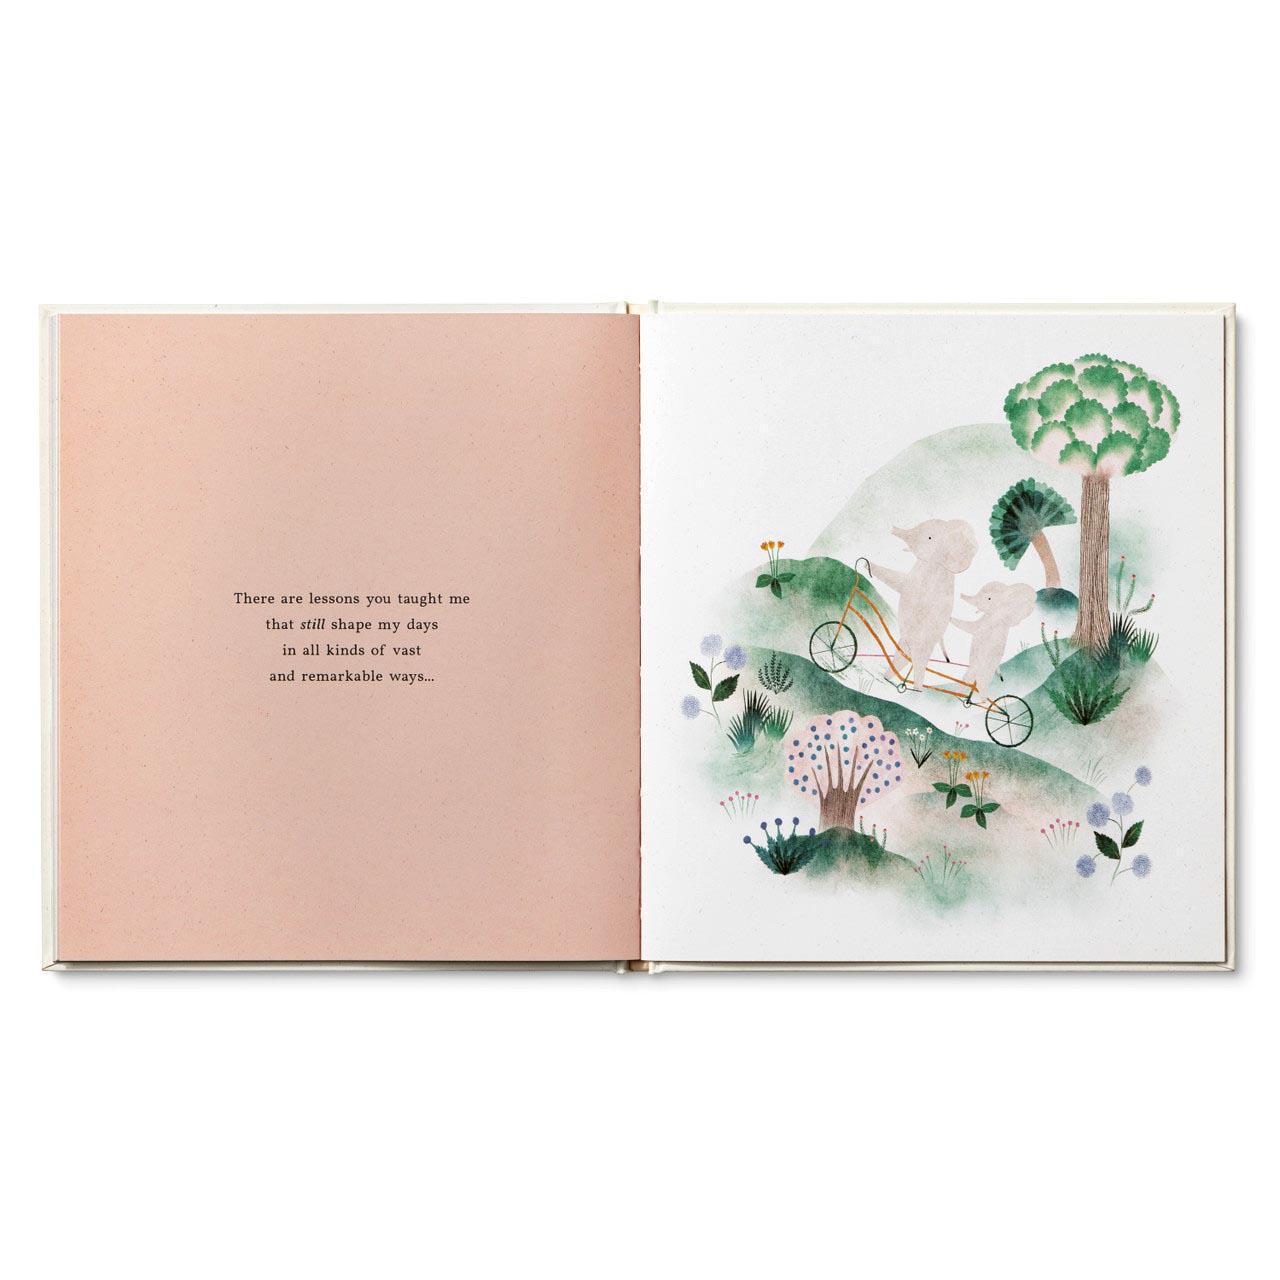 Mom, More Than a Little book Written by M.H. Clark and illustrated by Cécile Metzger